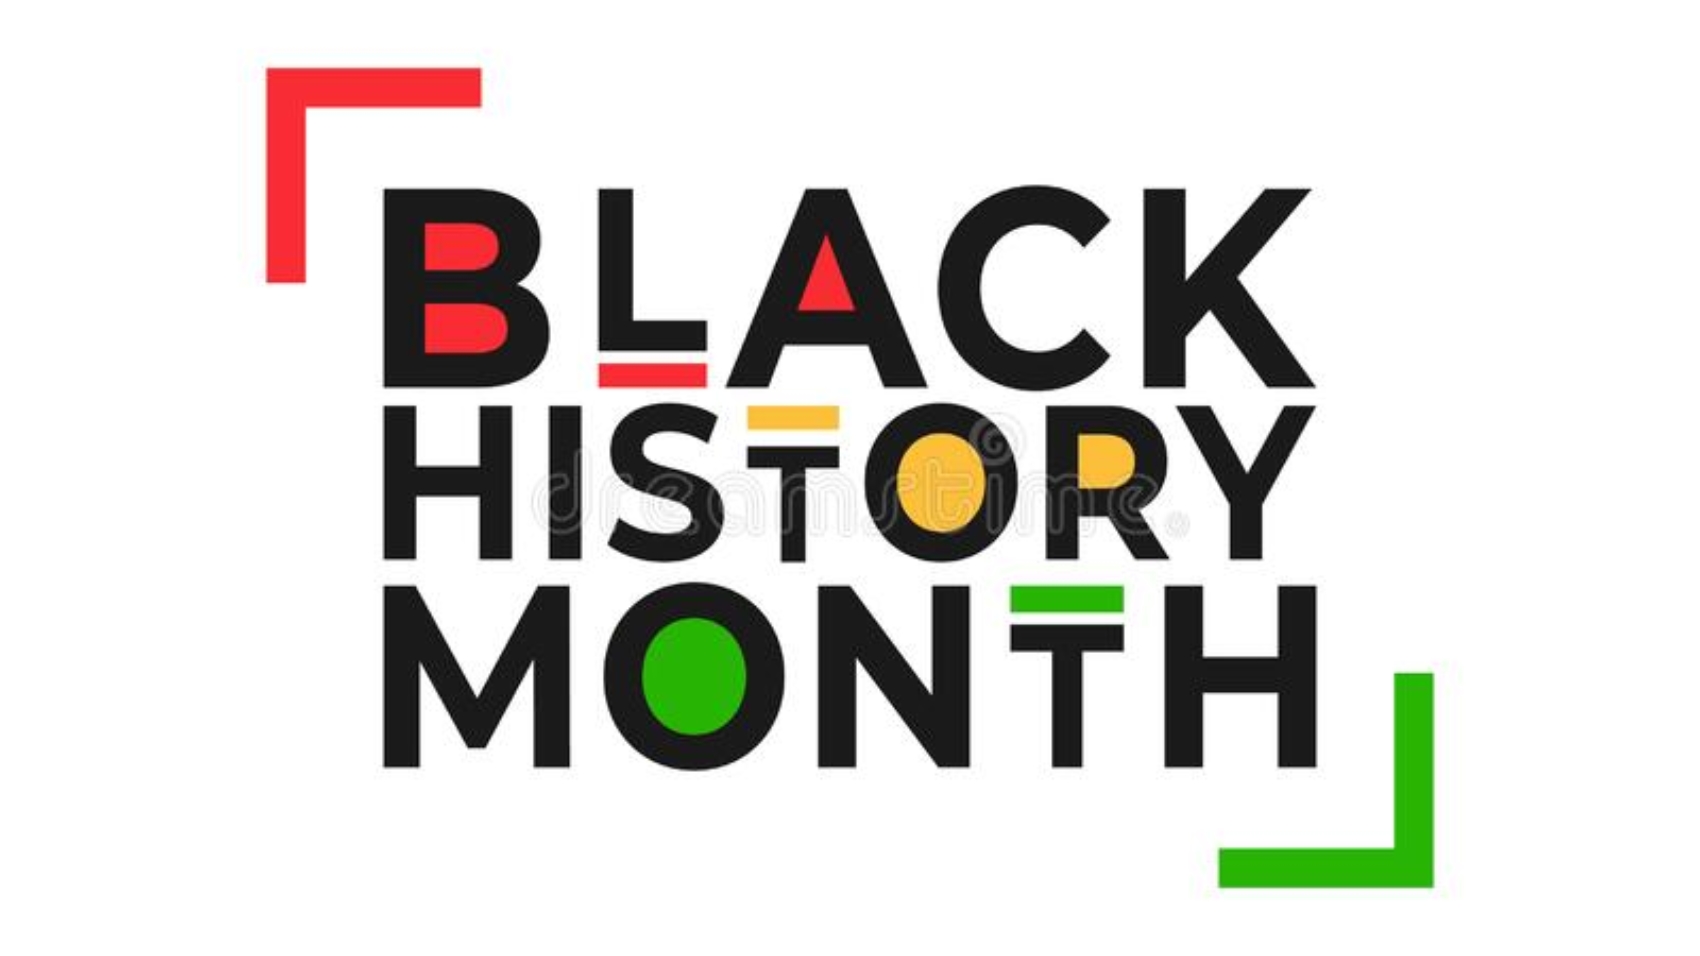 black-history-month-banner-vector-illustration-design-template-national-holiday-poster-card-annual-celebration-208537122